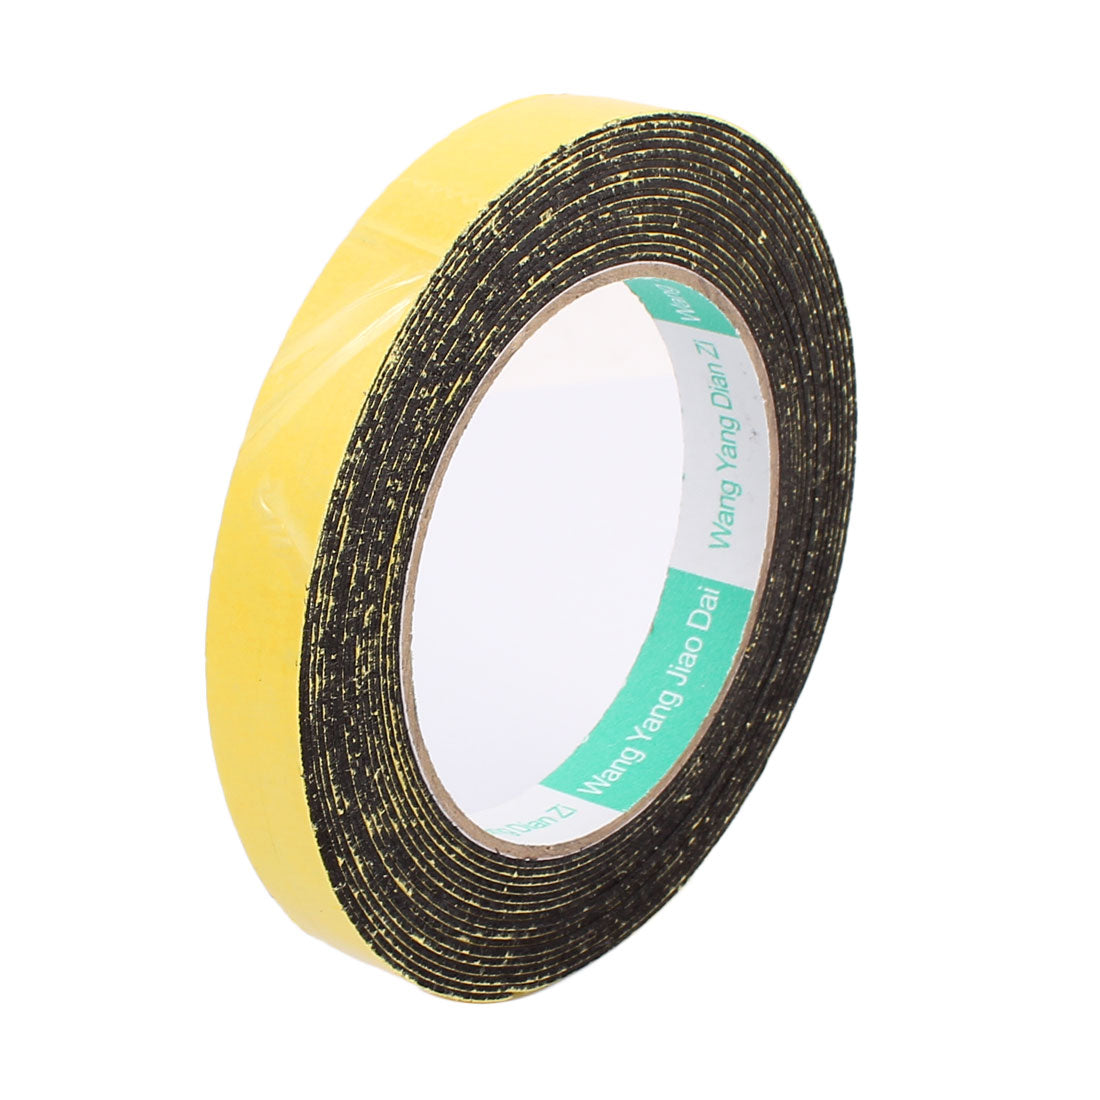 uxcell Uxcell 15mm x 1mm Single Sided Self Adhesive Shockproof Sponge Foam Tape 5M Length